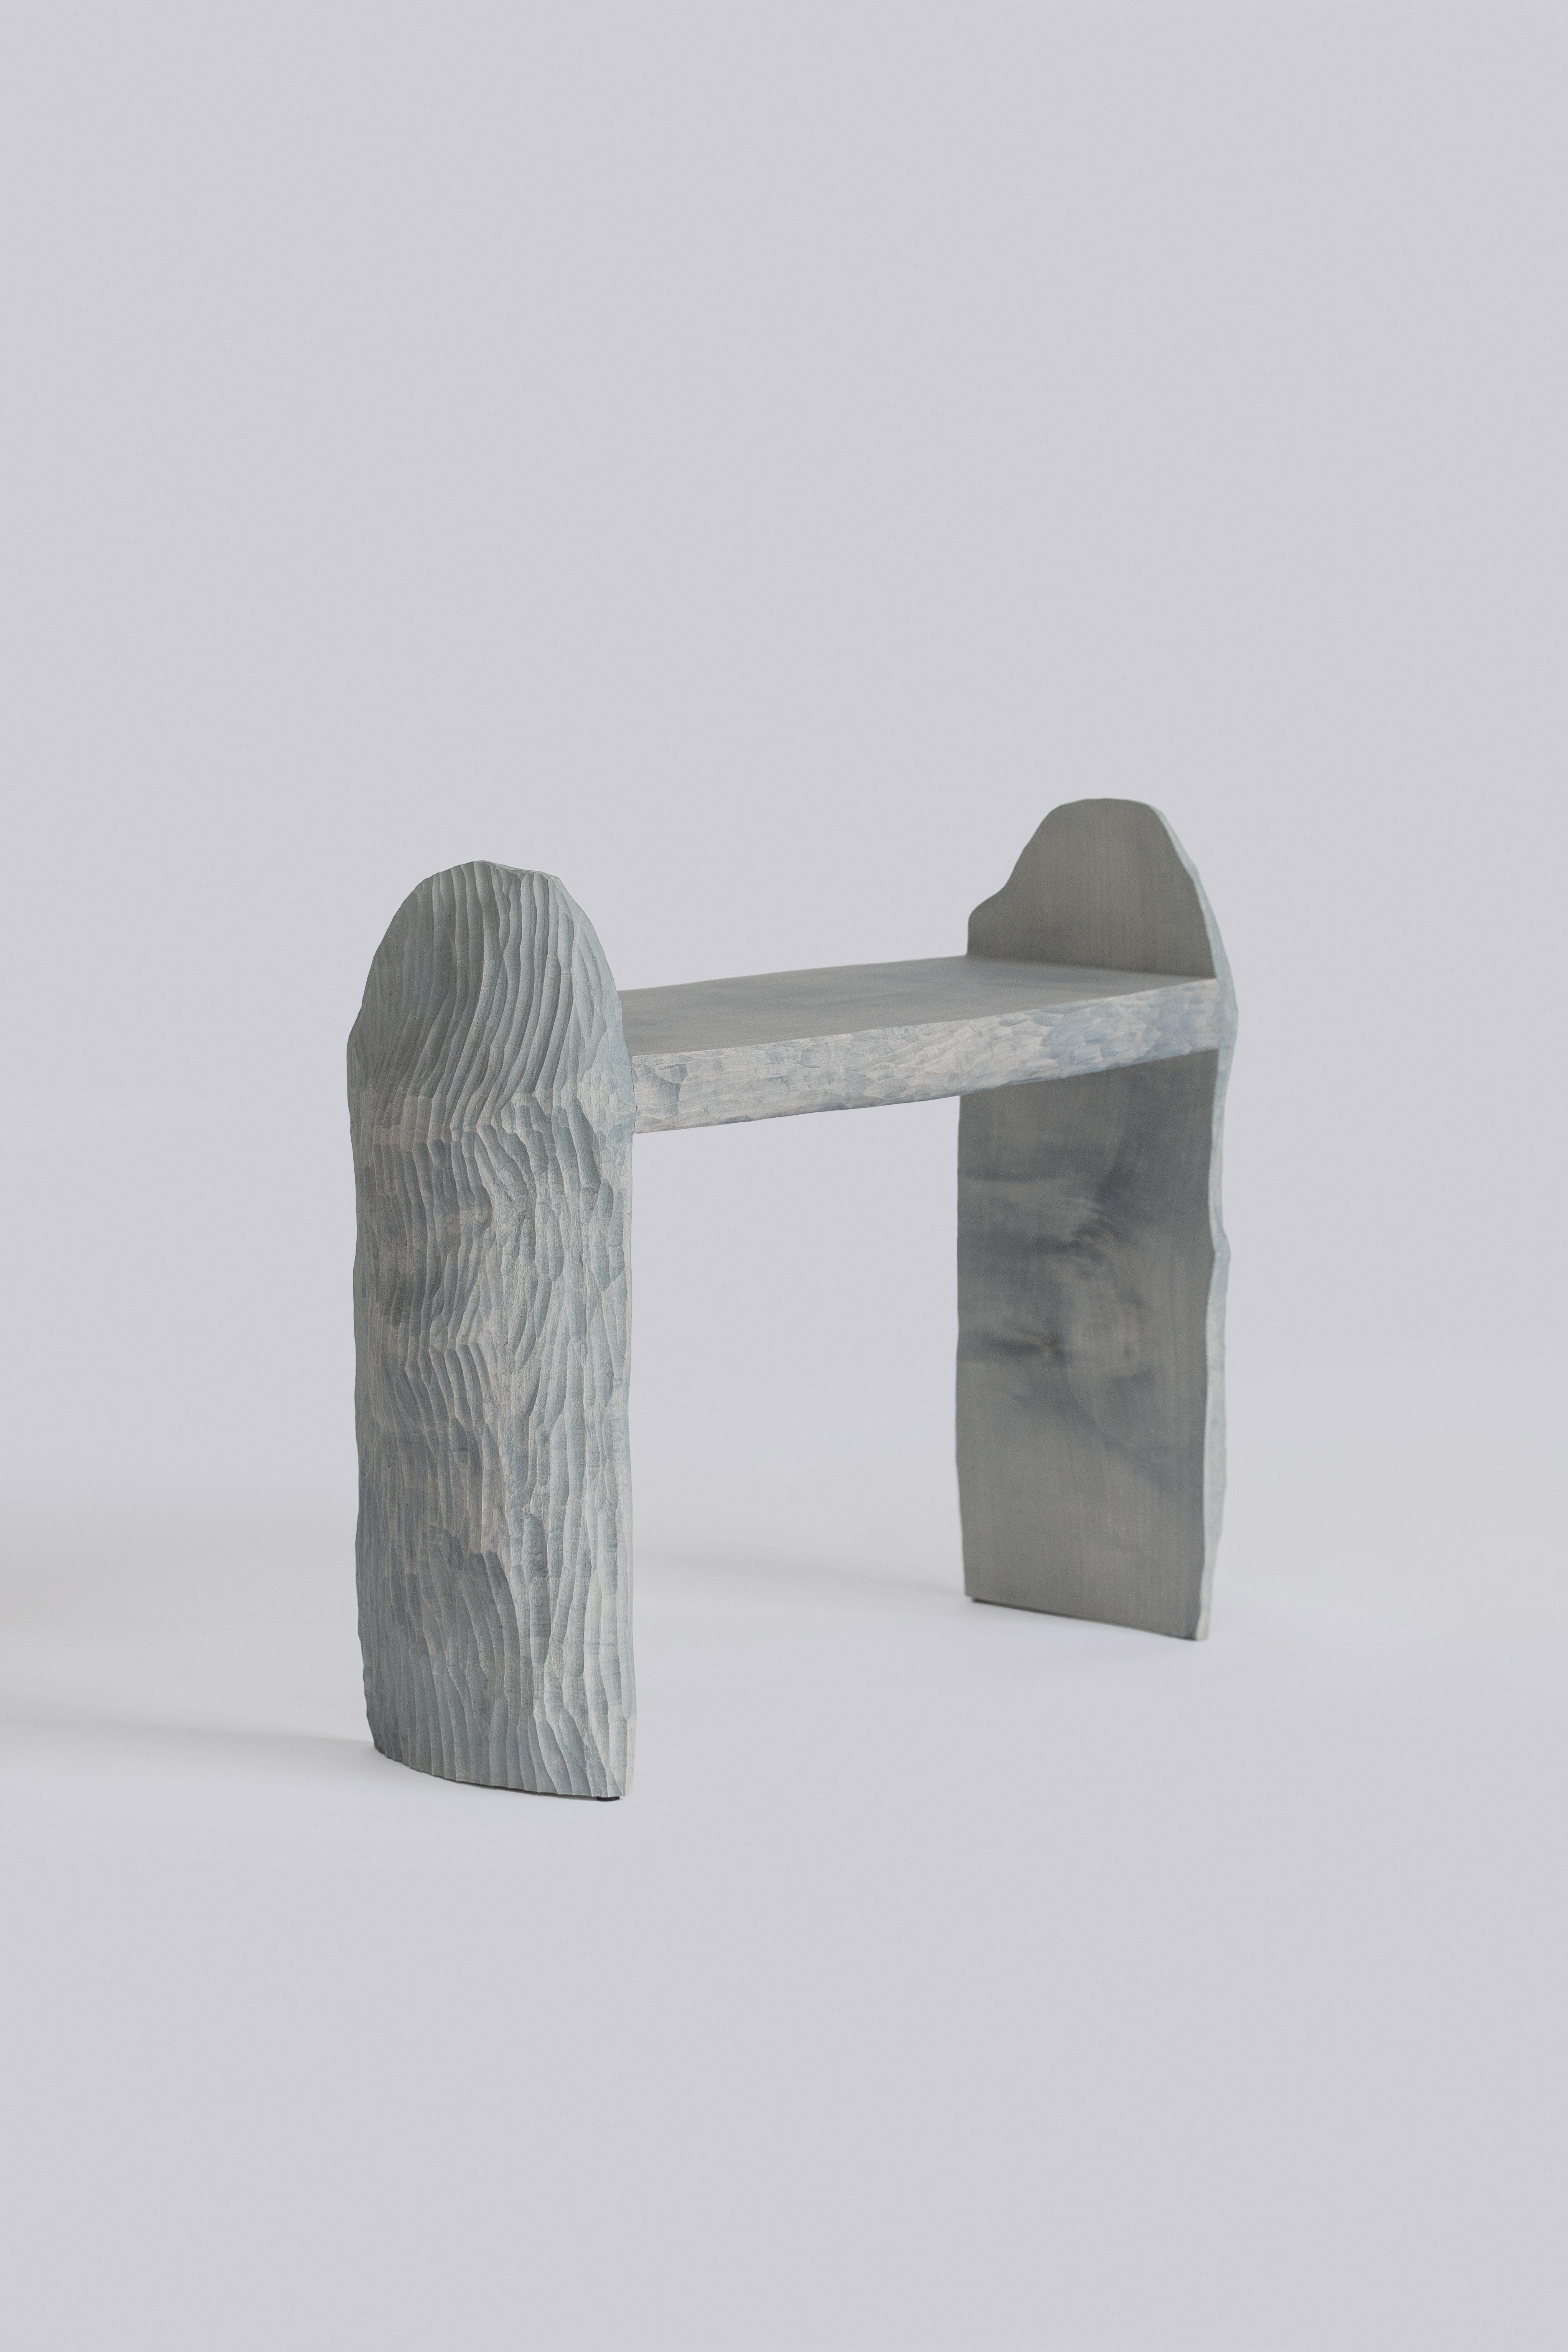 Intuitive Archaisme is a collection of furniture whose design and manufacturing process is based on the primitive instinct of assembling shapes to create a structure. The wood is worked with a gouge, revealing its structure as the tool passes over